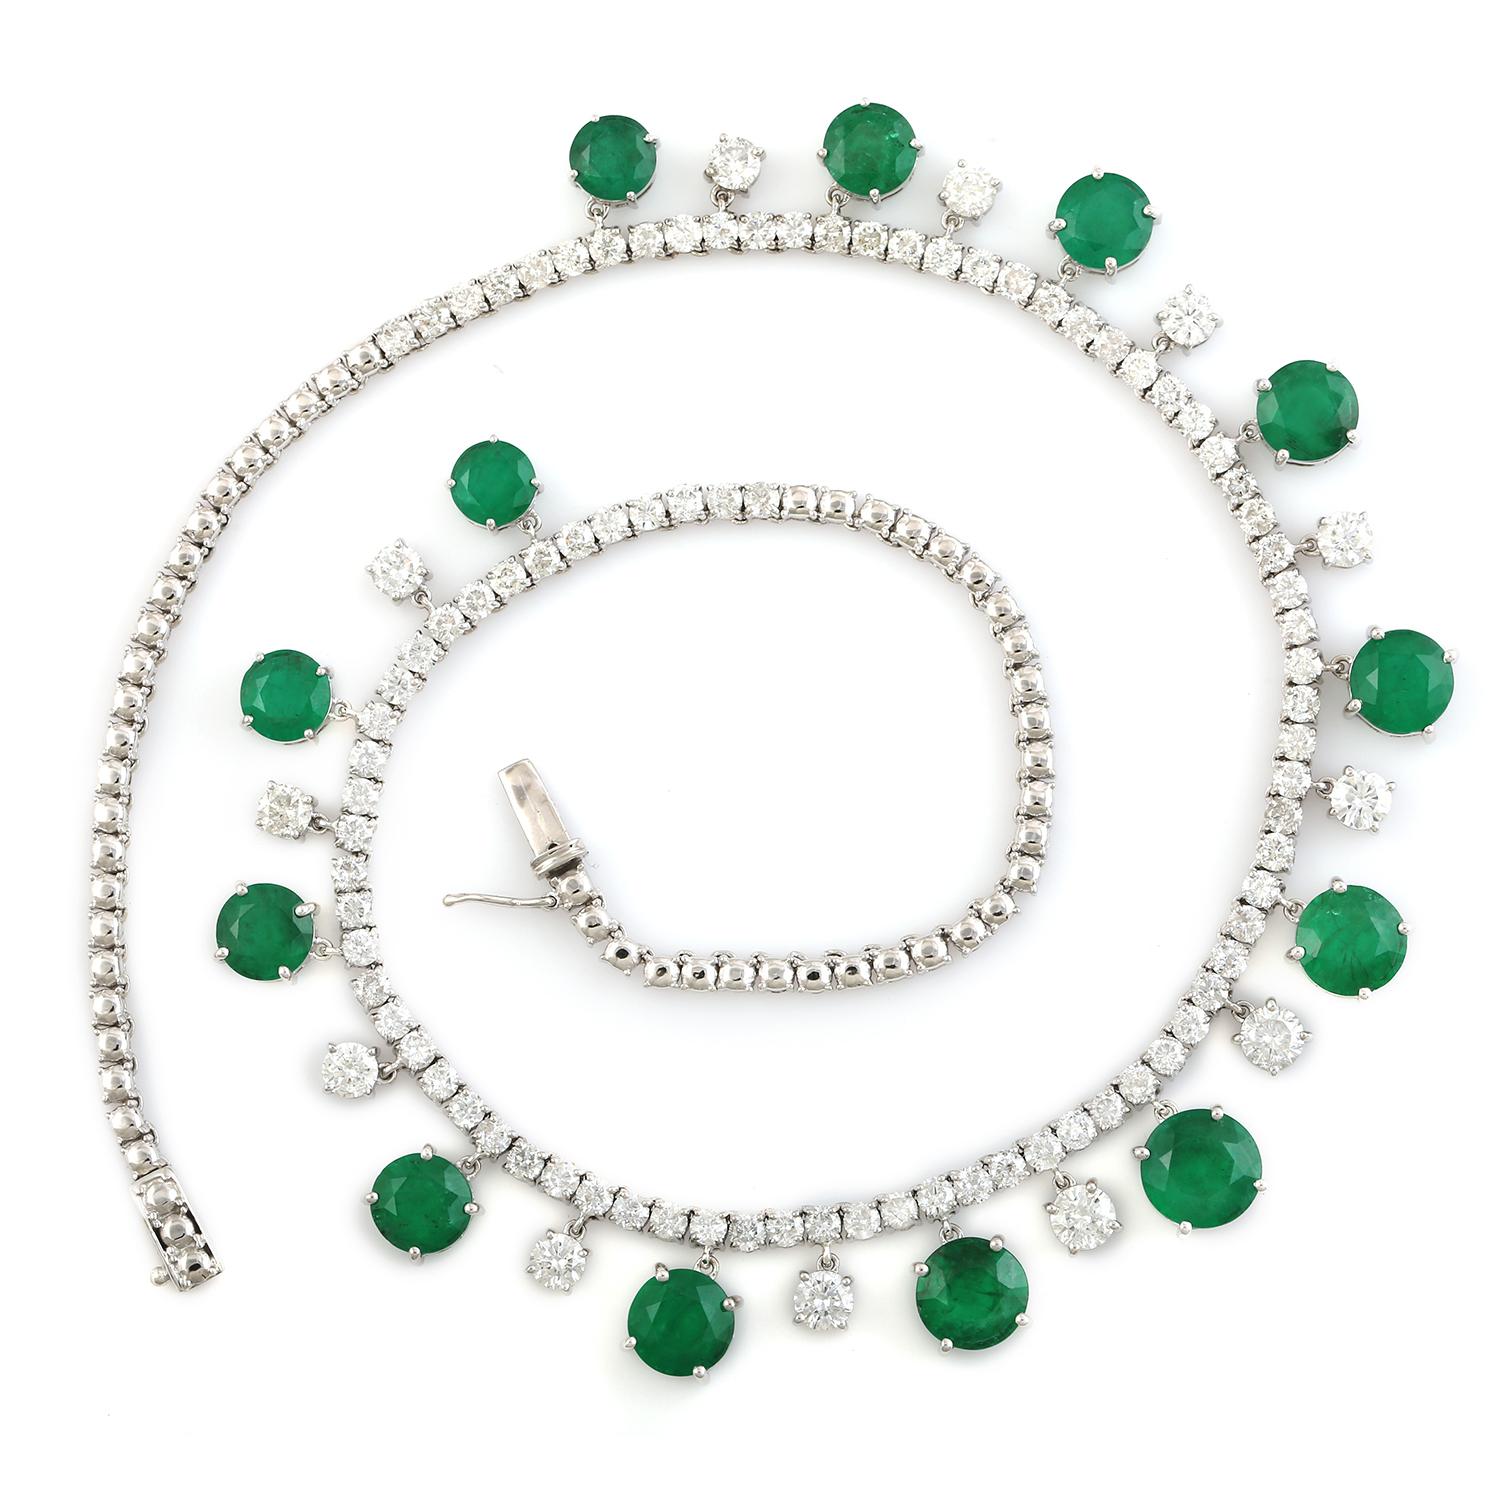 Cast from 14-karat white gold, this stunning necklace is hand set with 20.68 carats Emerald and 12.23 carats of sparkling diamonds. 

FOLLOW MEGHNA JEWELS storefront to view the latest collection & exclusive pieces. Meghna Jewels is proudly rated as